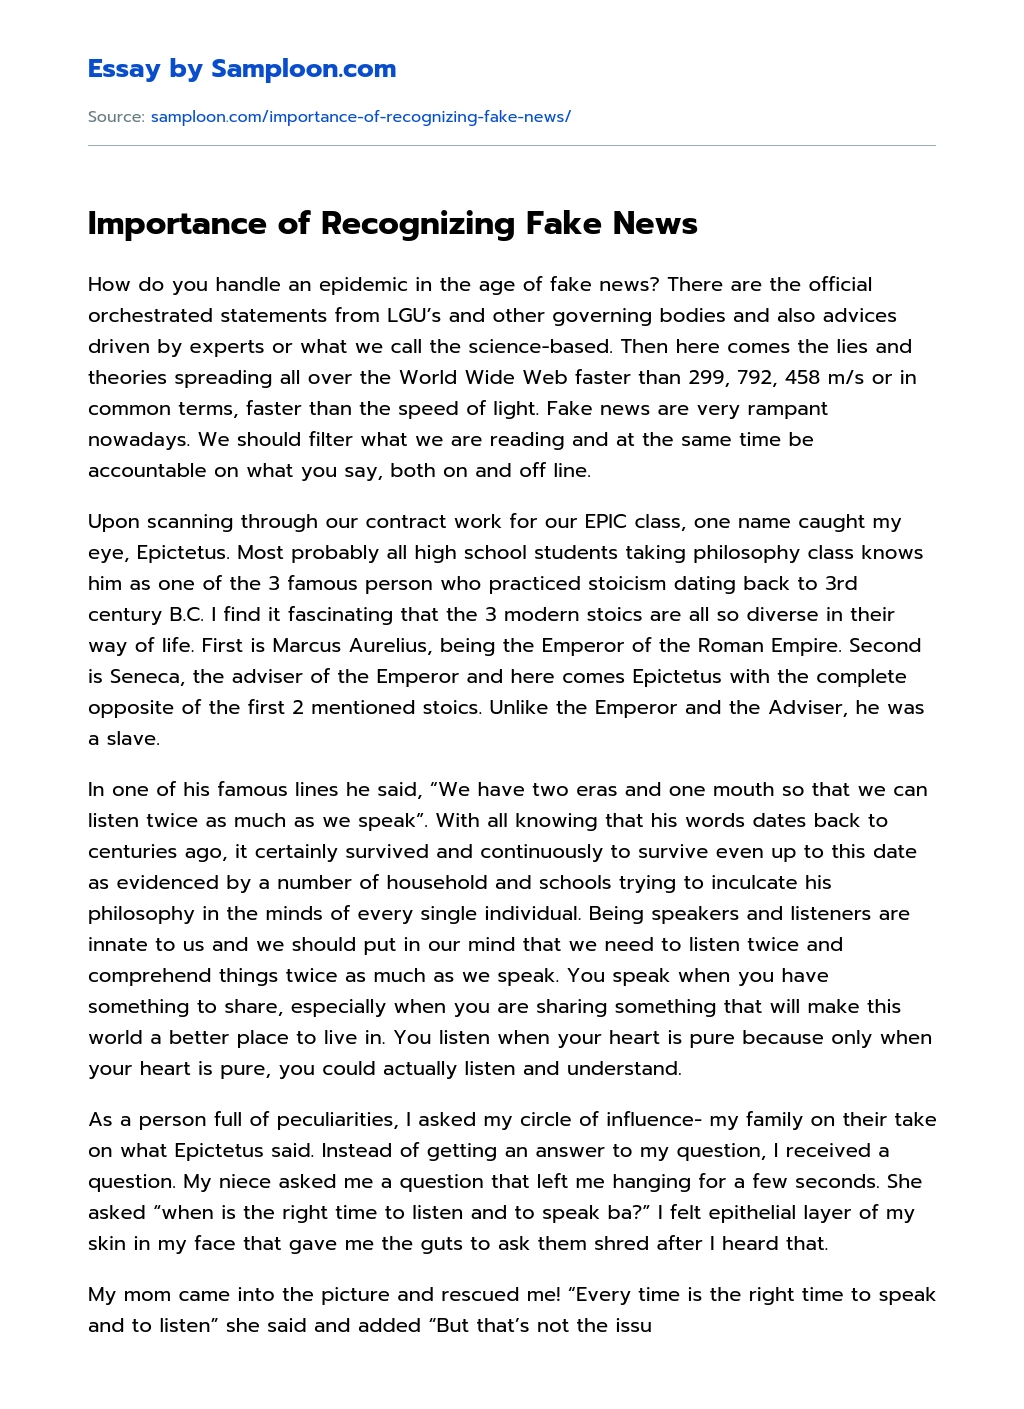 Importance of Recognizing Fake News essay